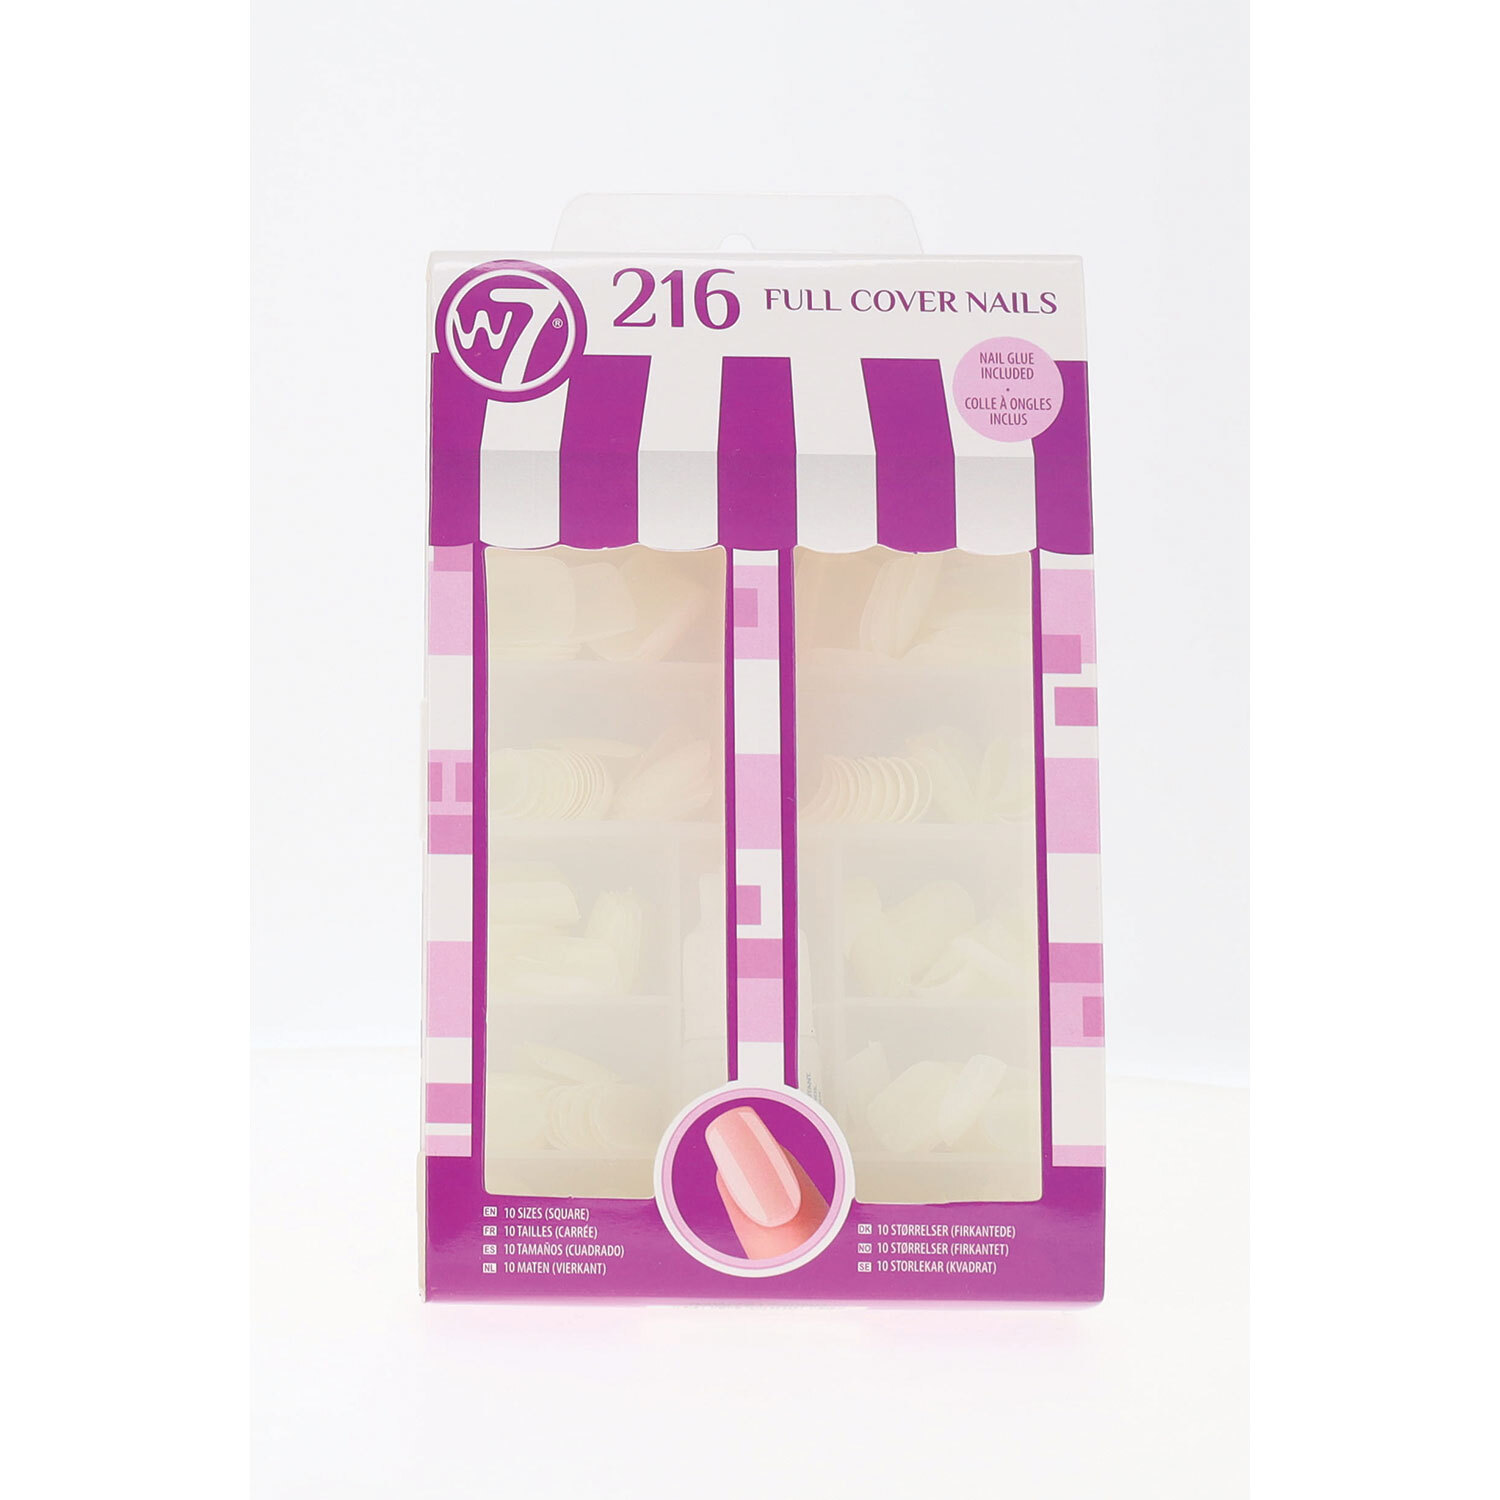 Pack of 216 W7 Square Full Cover Nails Image